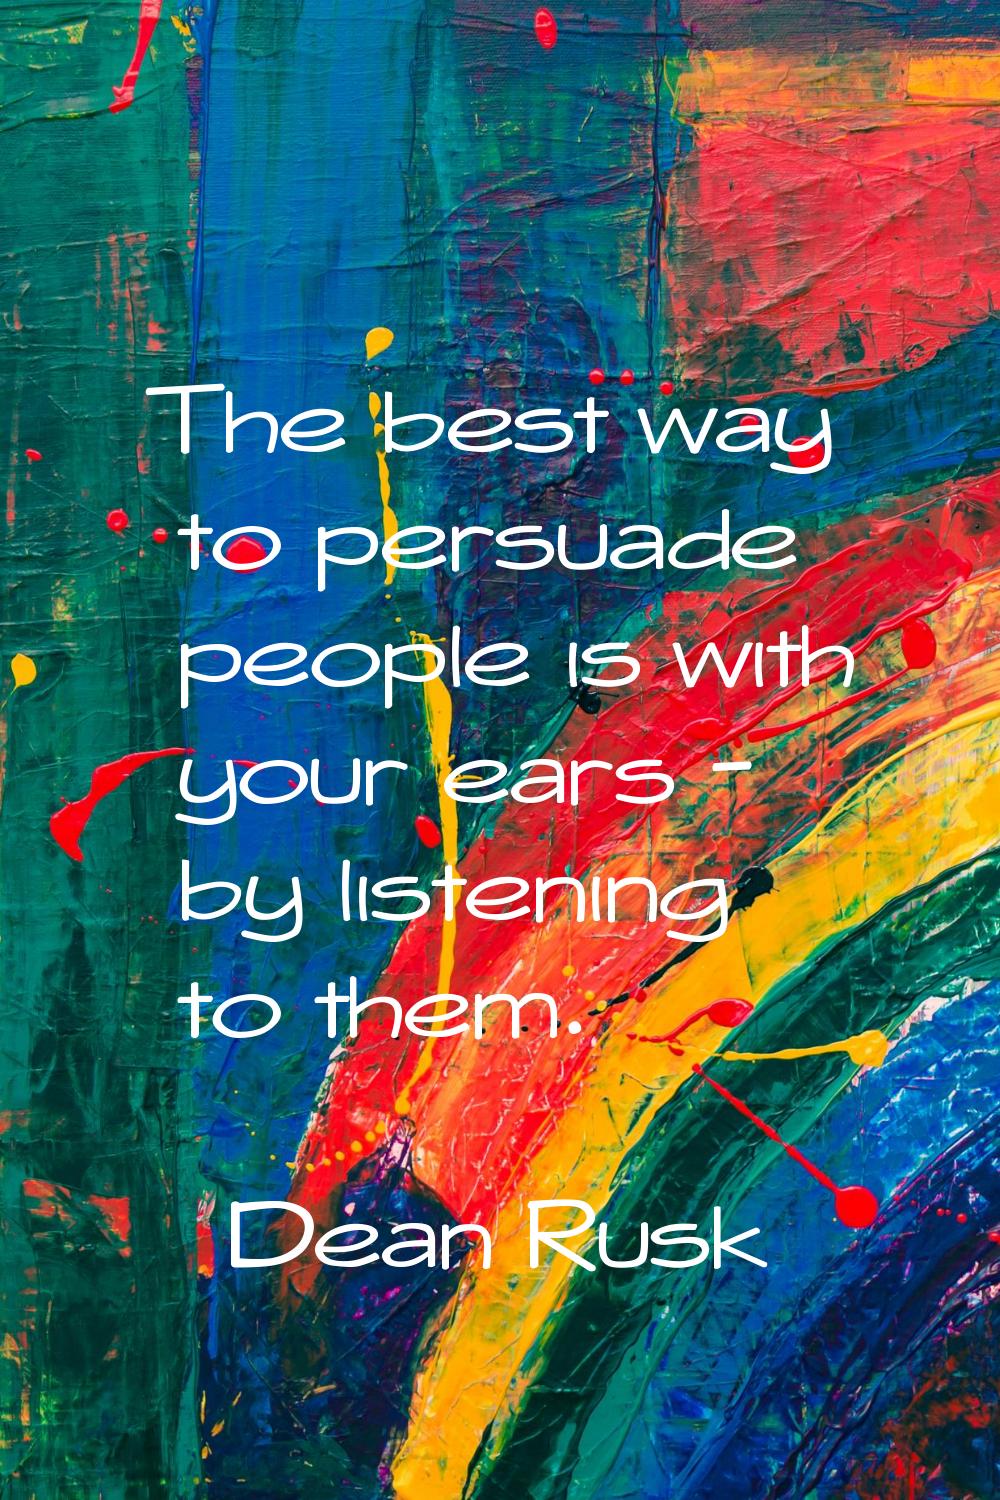 The best way to persuade people is with your ears - by listening to them.